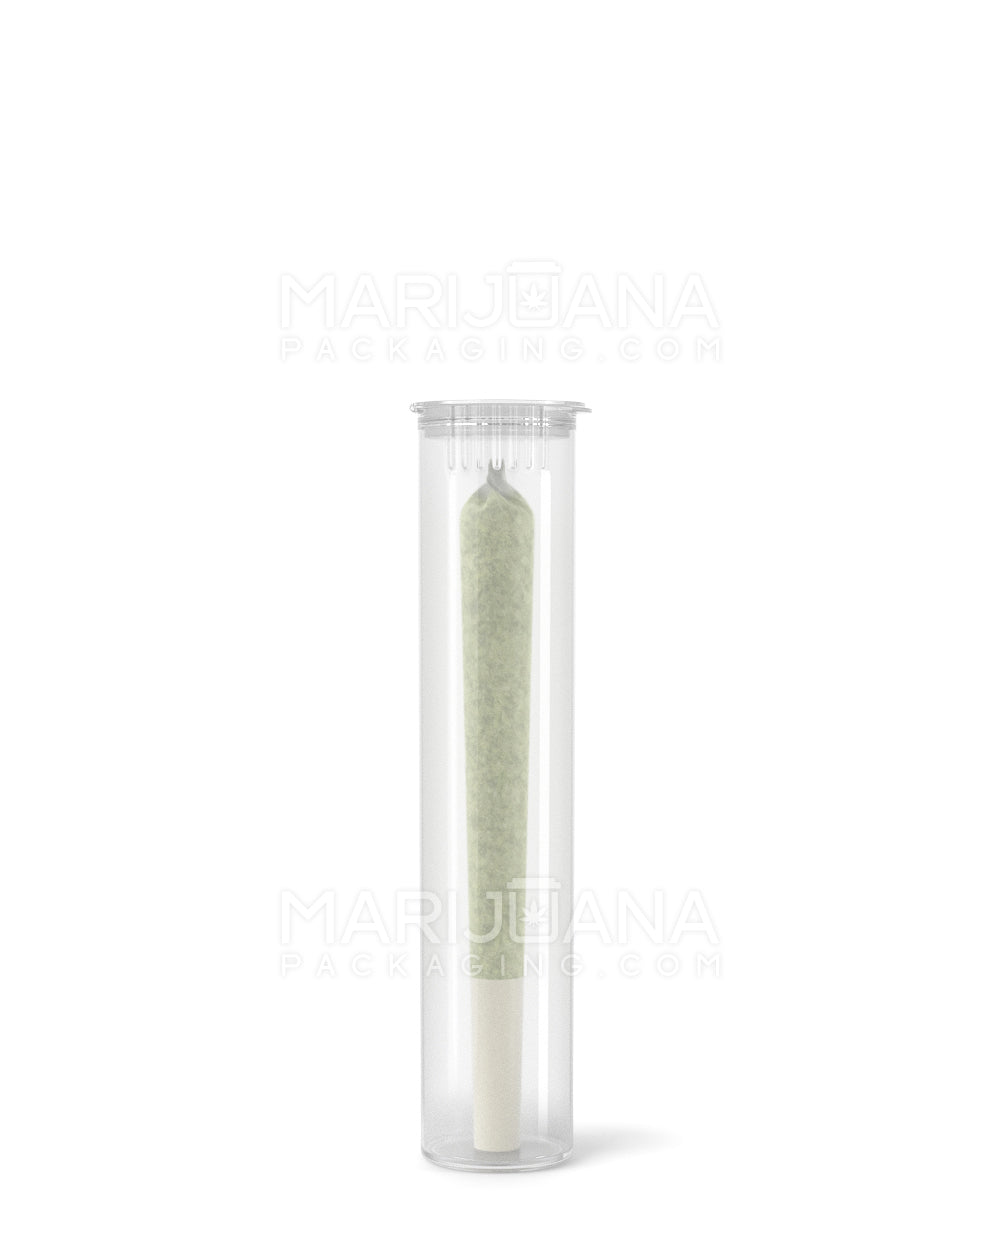 Child Resistant | Pop Top Plastic Pre-Roll Tubes | 90mm - Clear - 1000 Count - 3